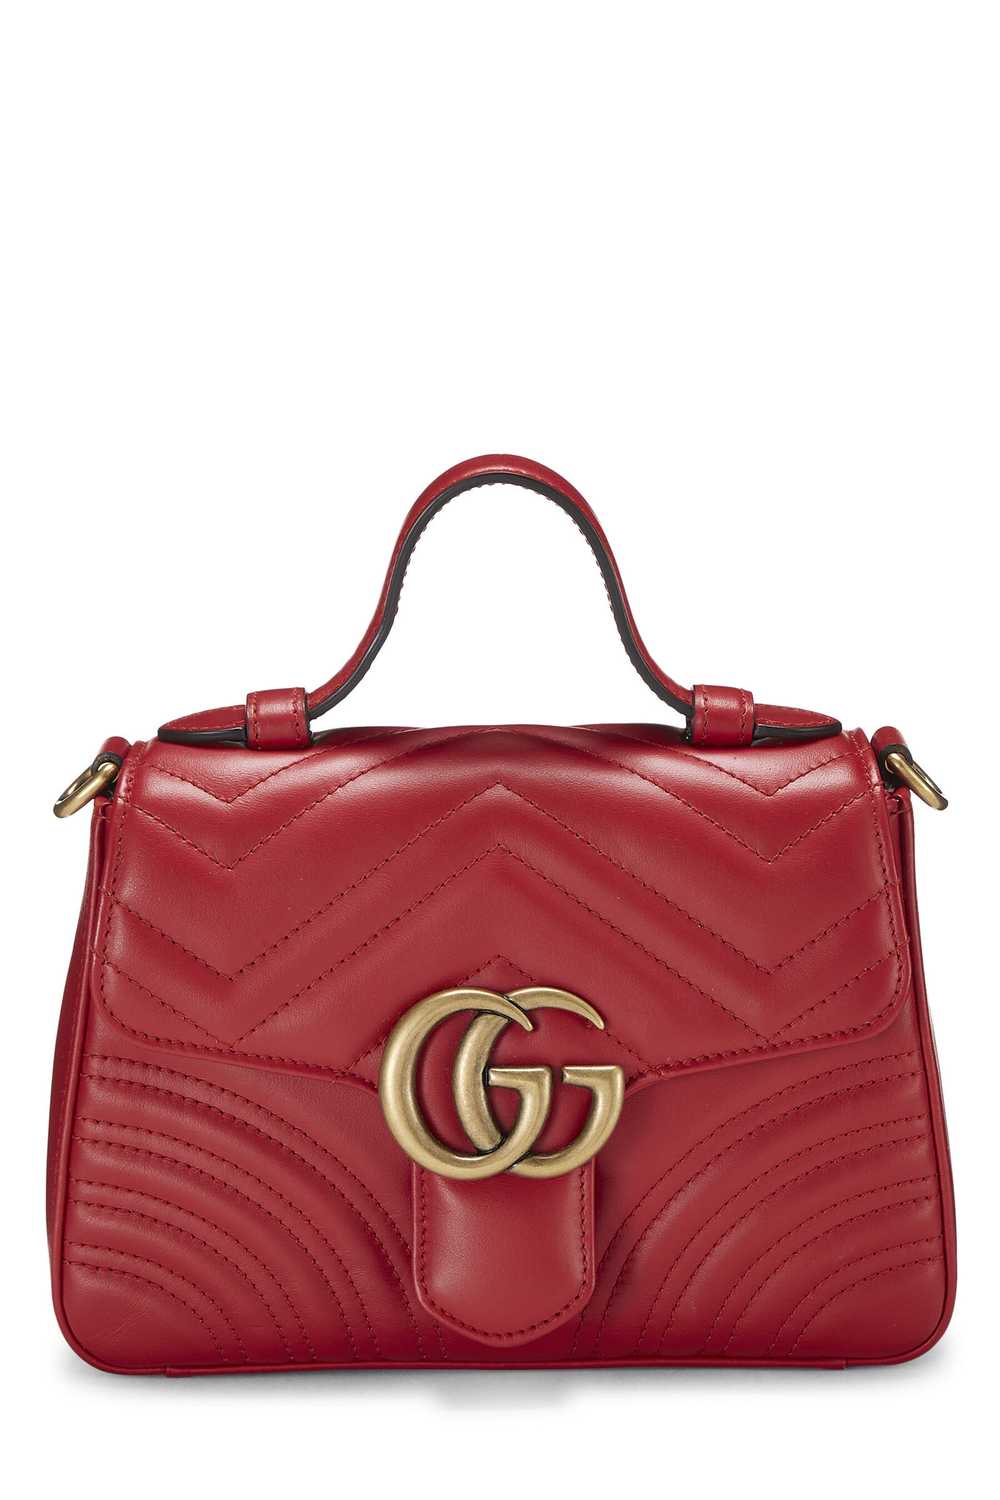 Red Leather GG Marmont Top Handle Bag Mini - image 1